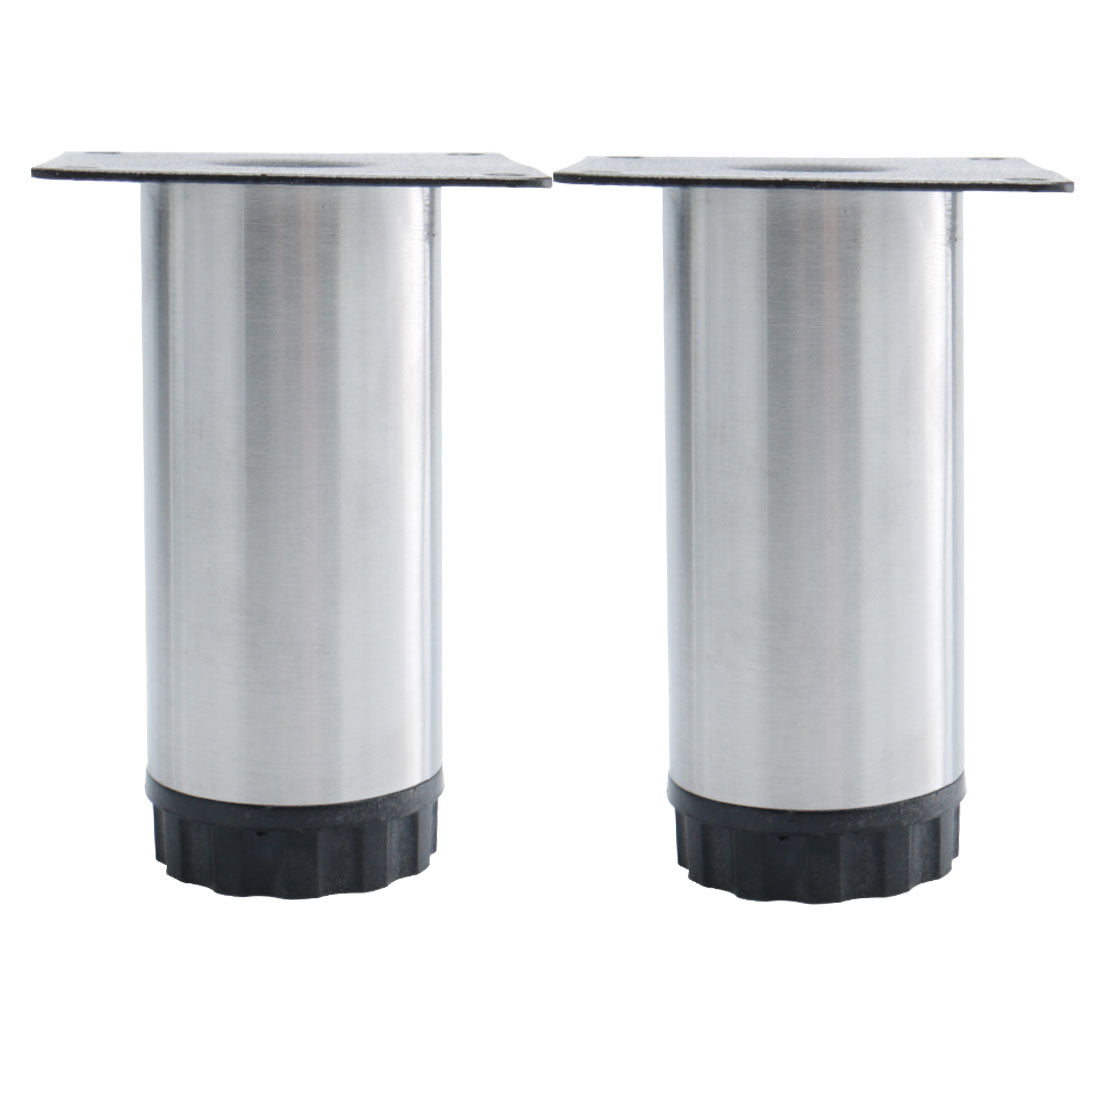 uxcell Uxcell 6" Furniture Legs Stainless Steel Sofa Table Adjustable Feet Replacement 2pcs